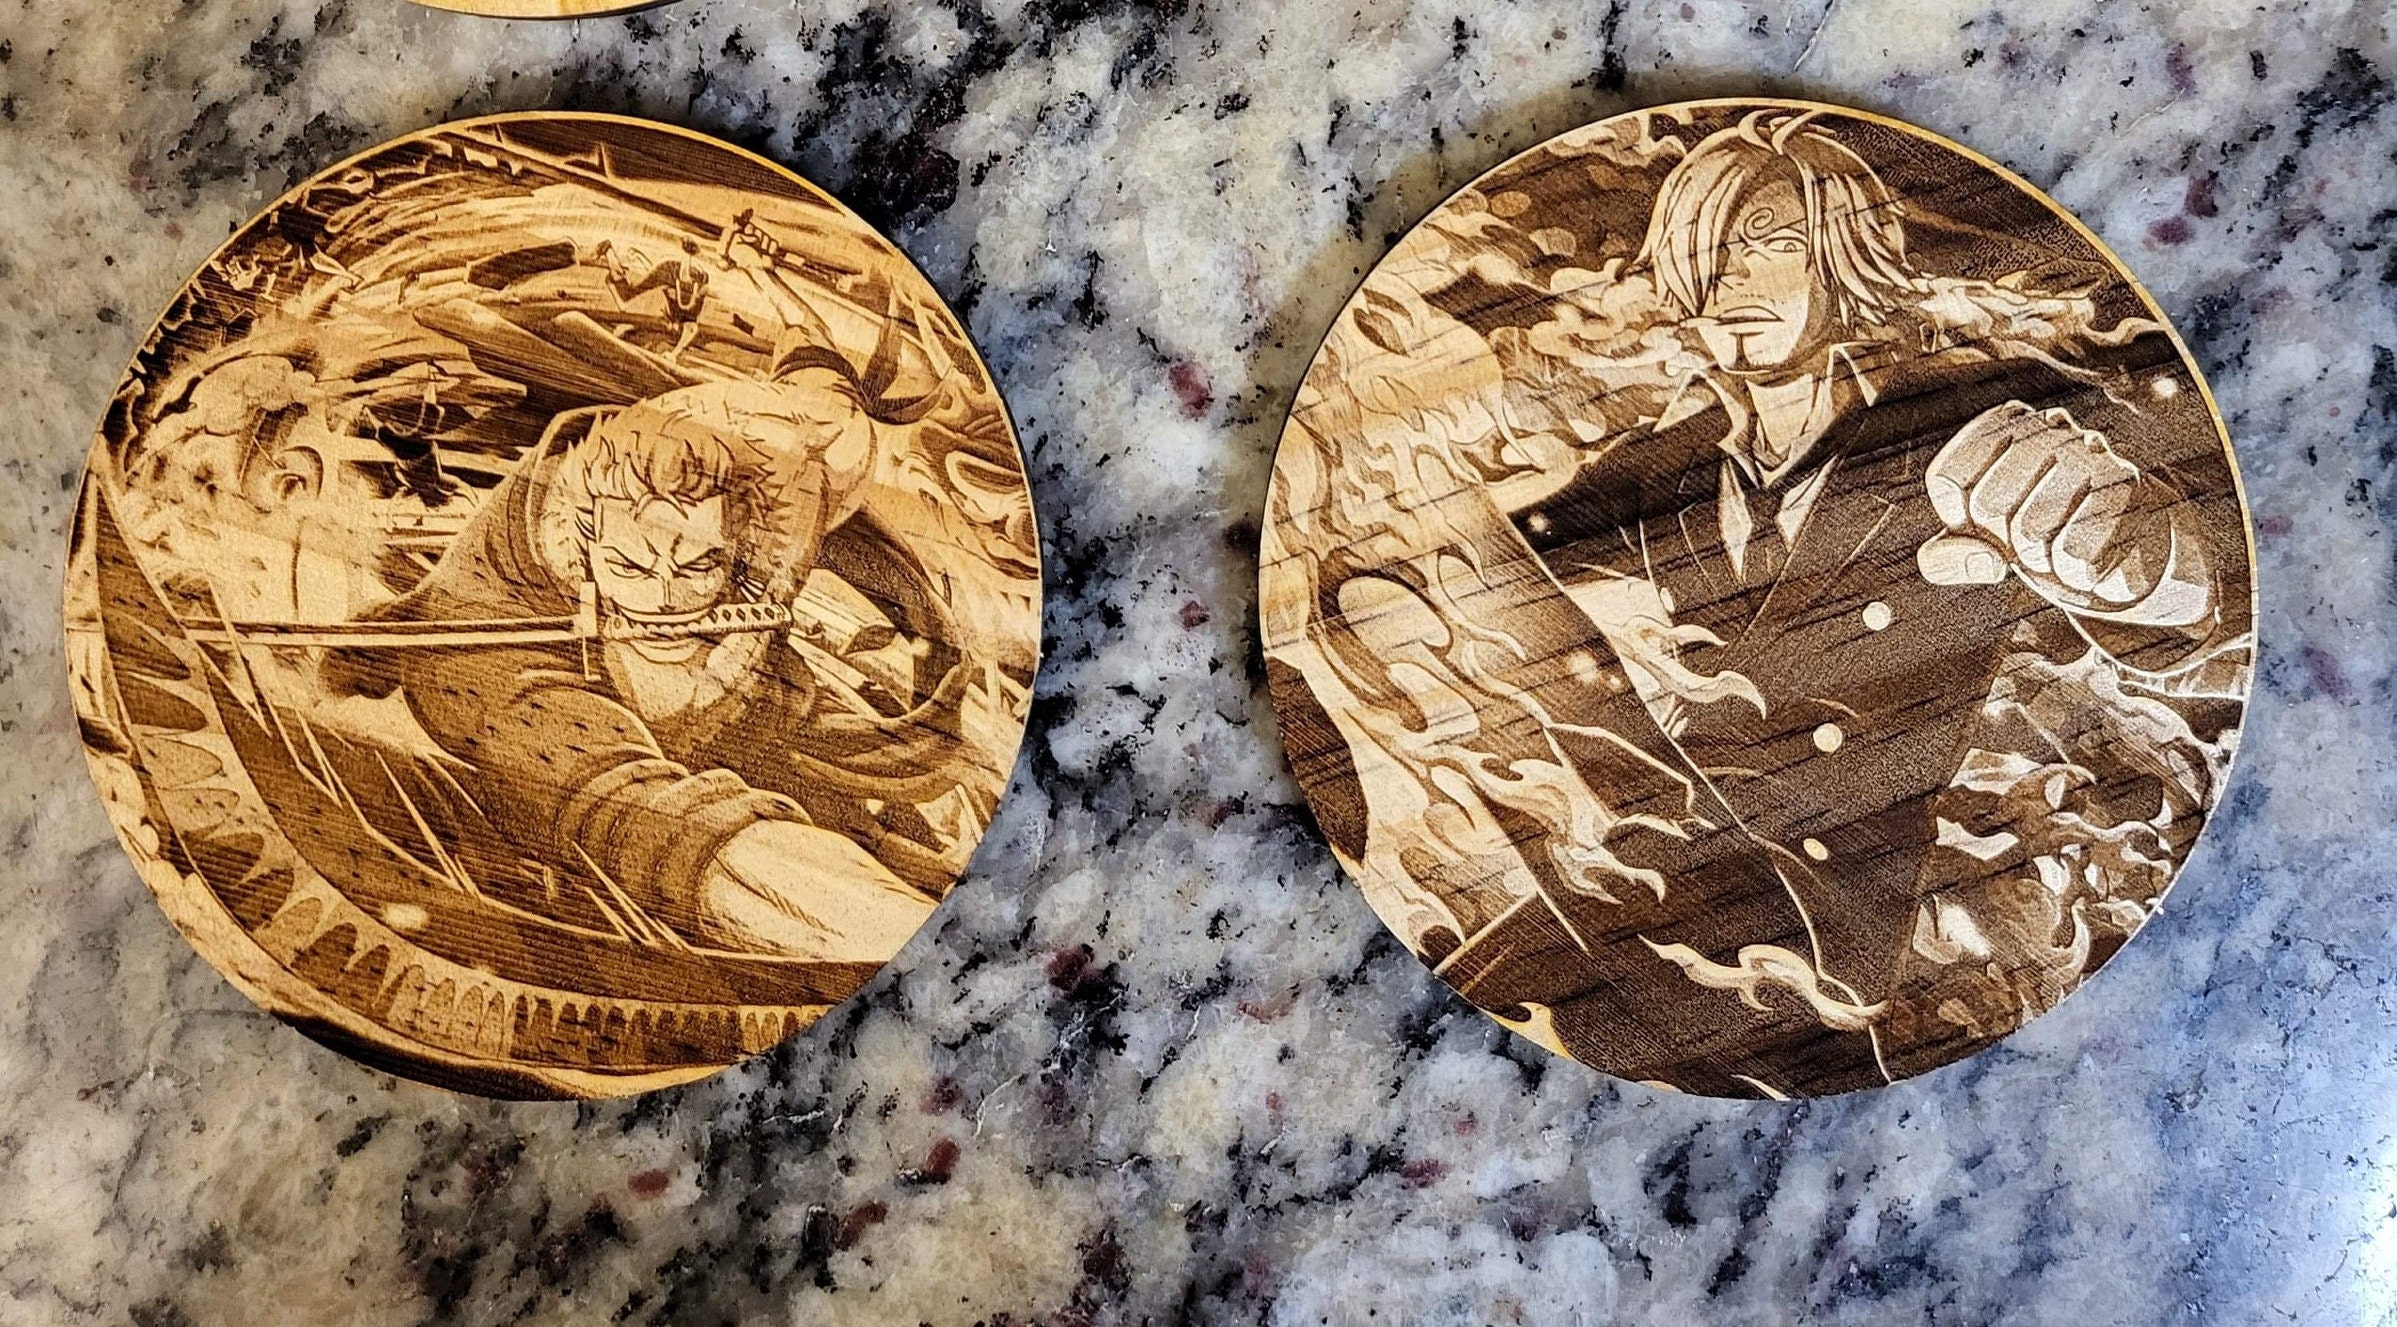 One Piece Wooden Coasters